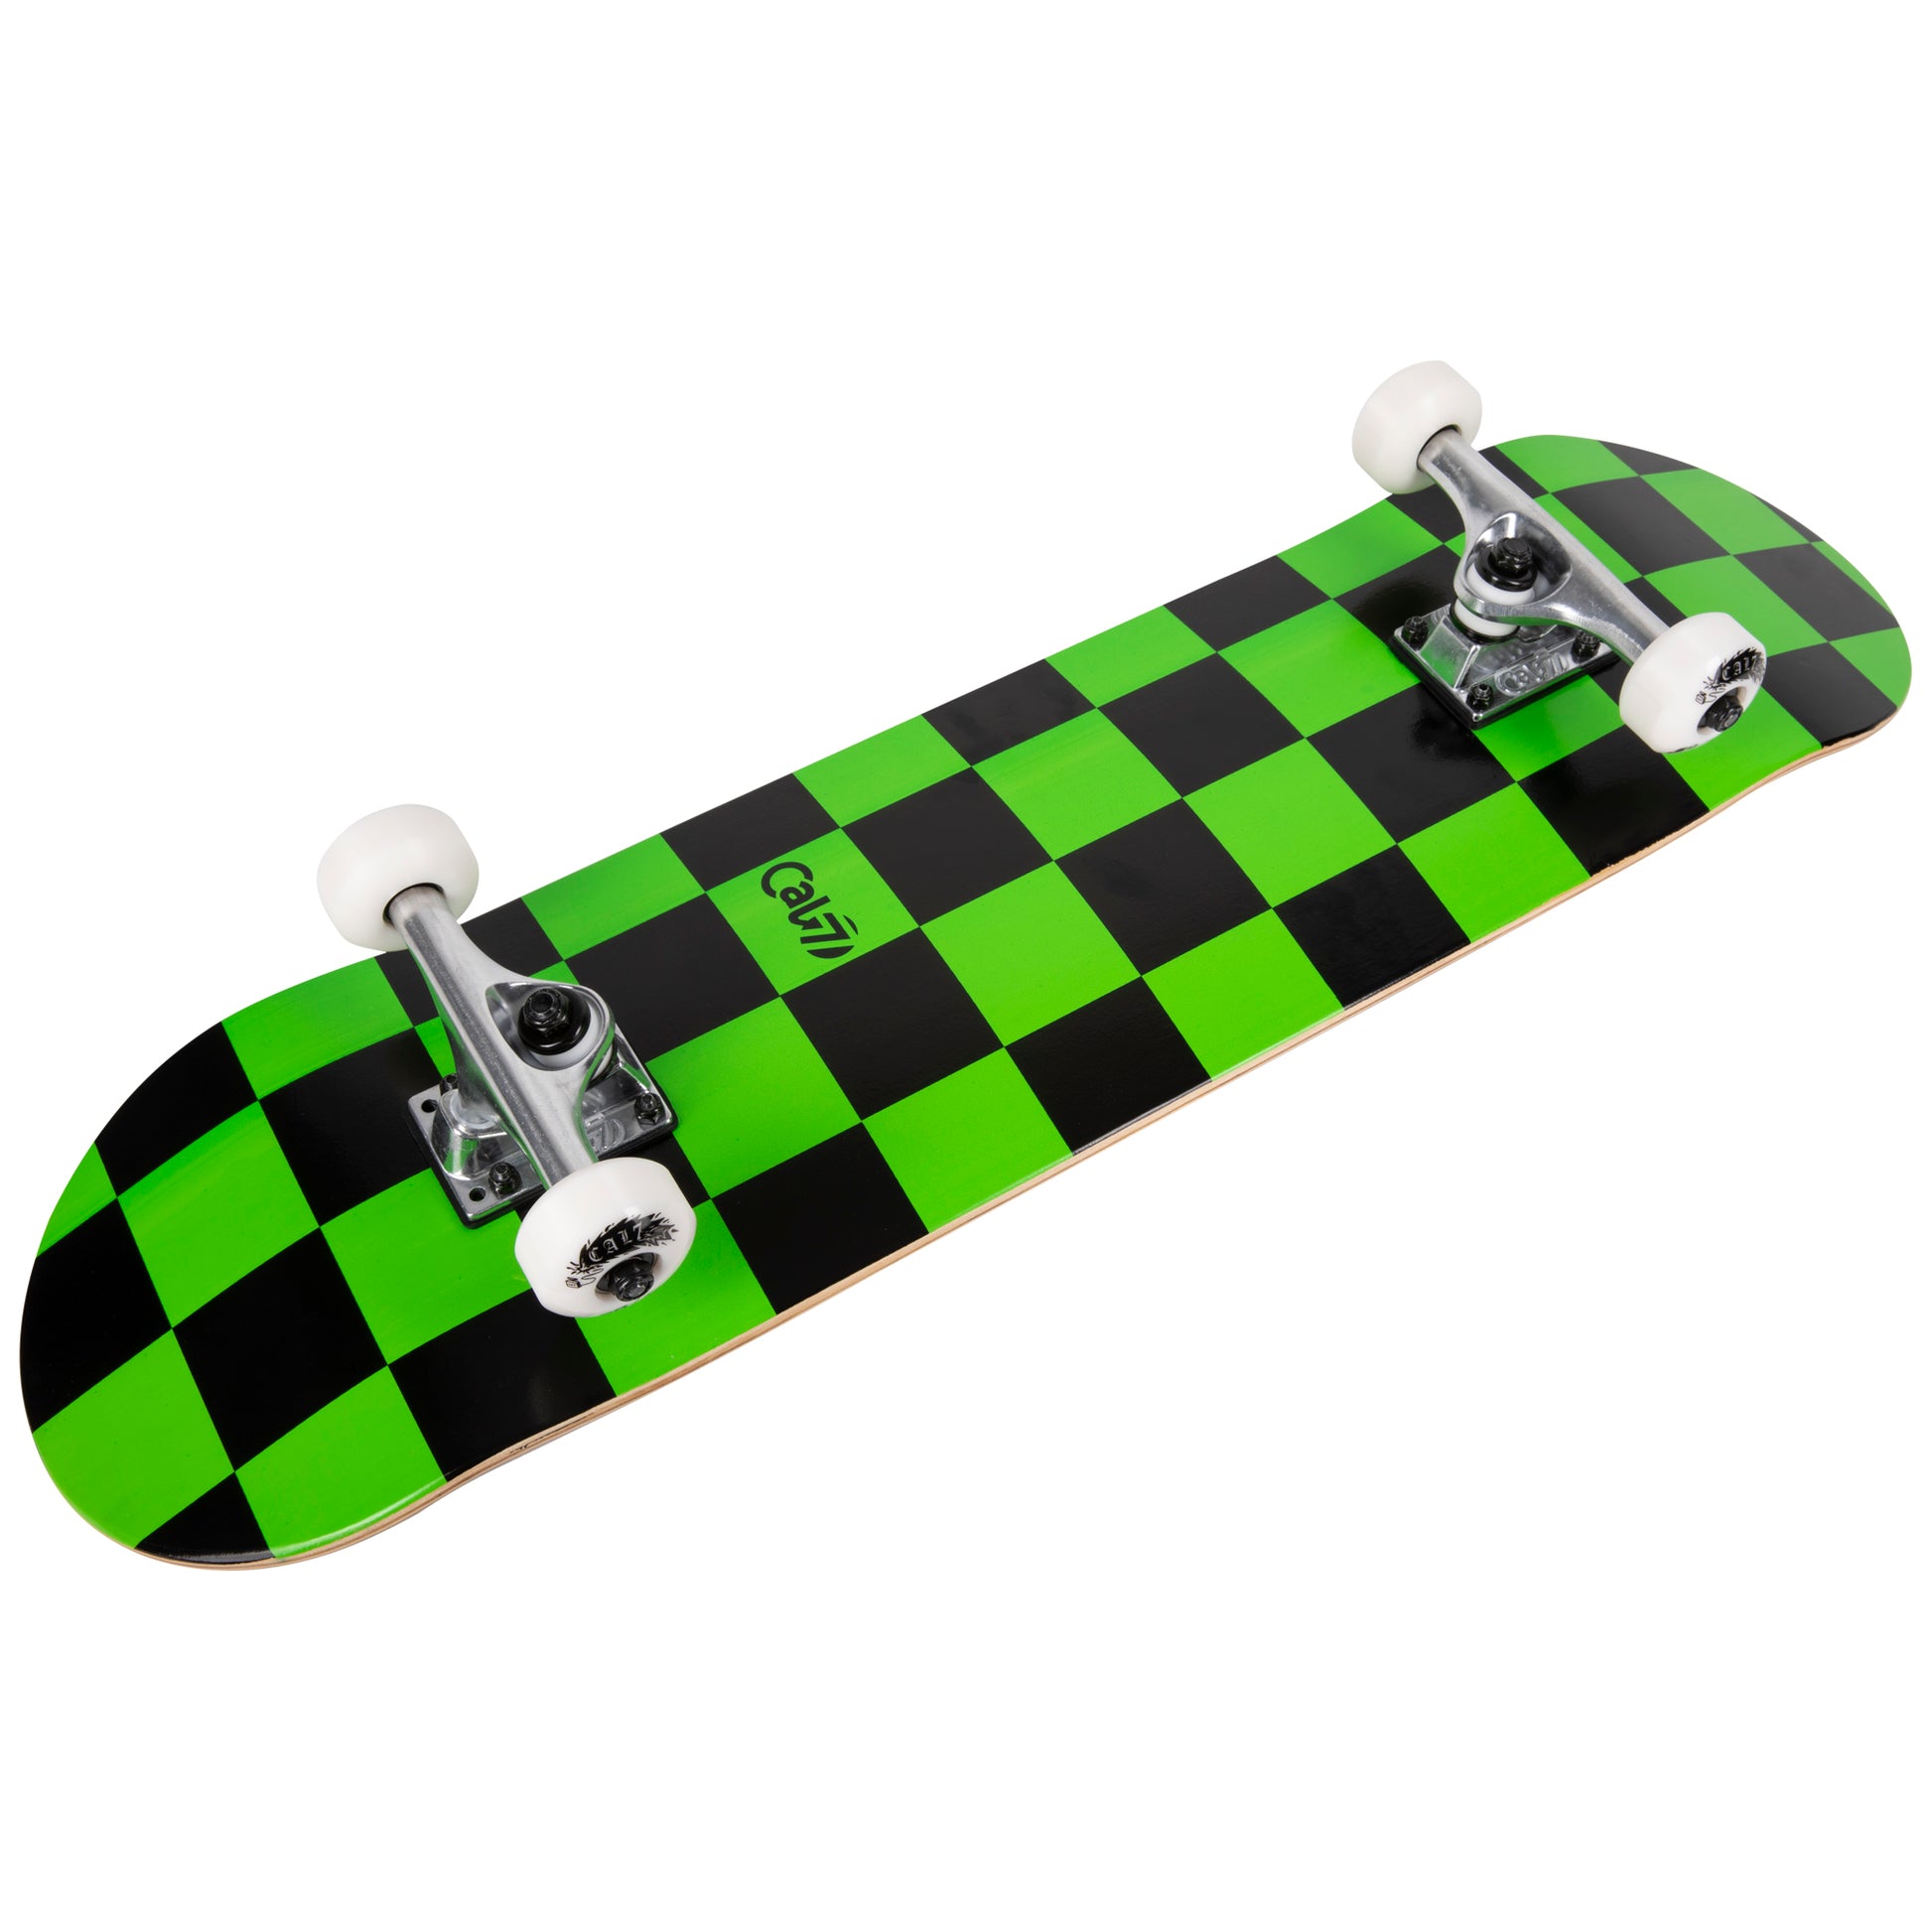 Cal 7 Complete 7.5/7.75/8-Inch Skateboard Optical with Lime Green and Black Check Design